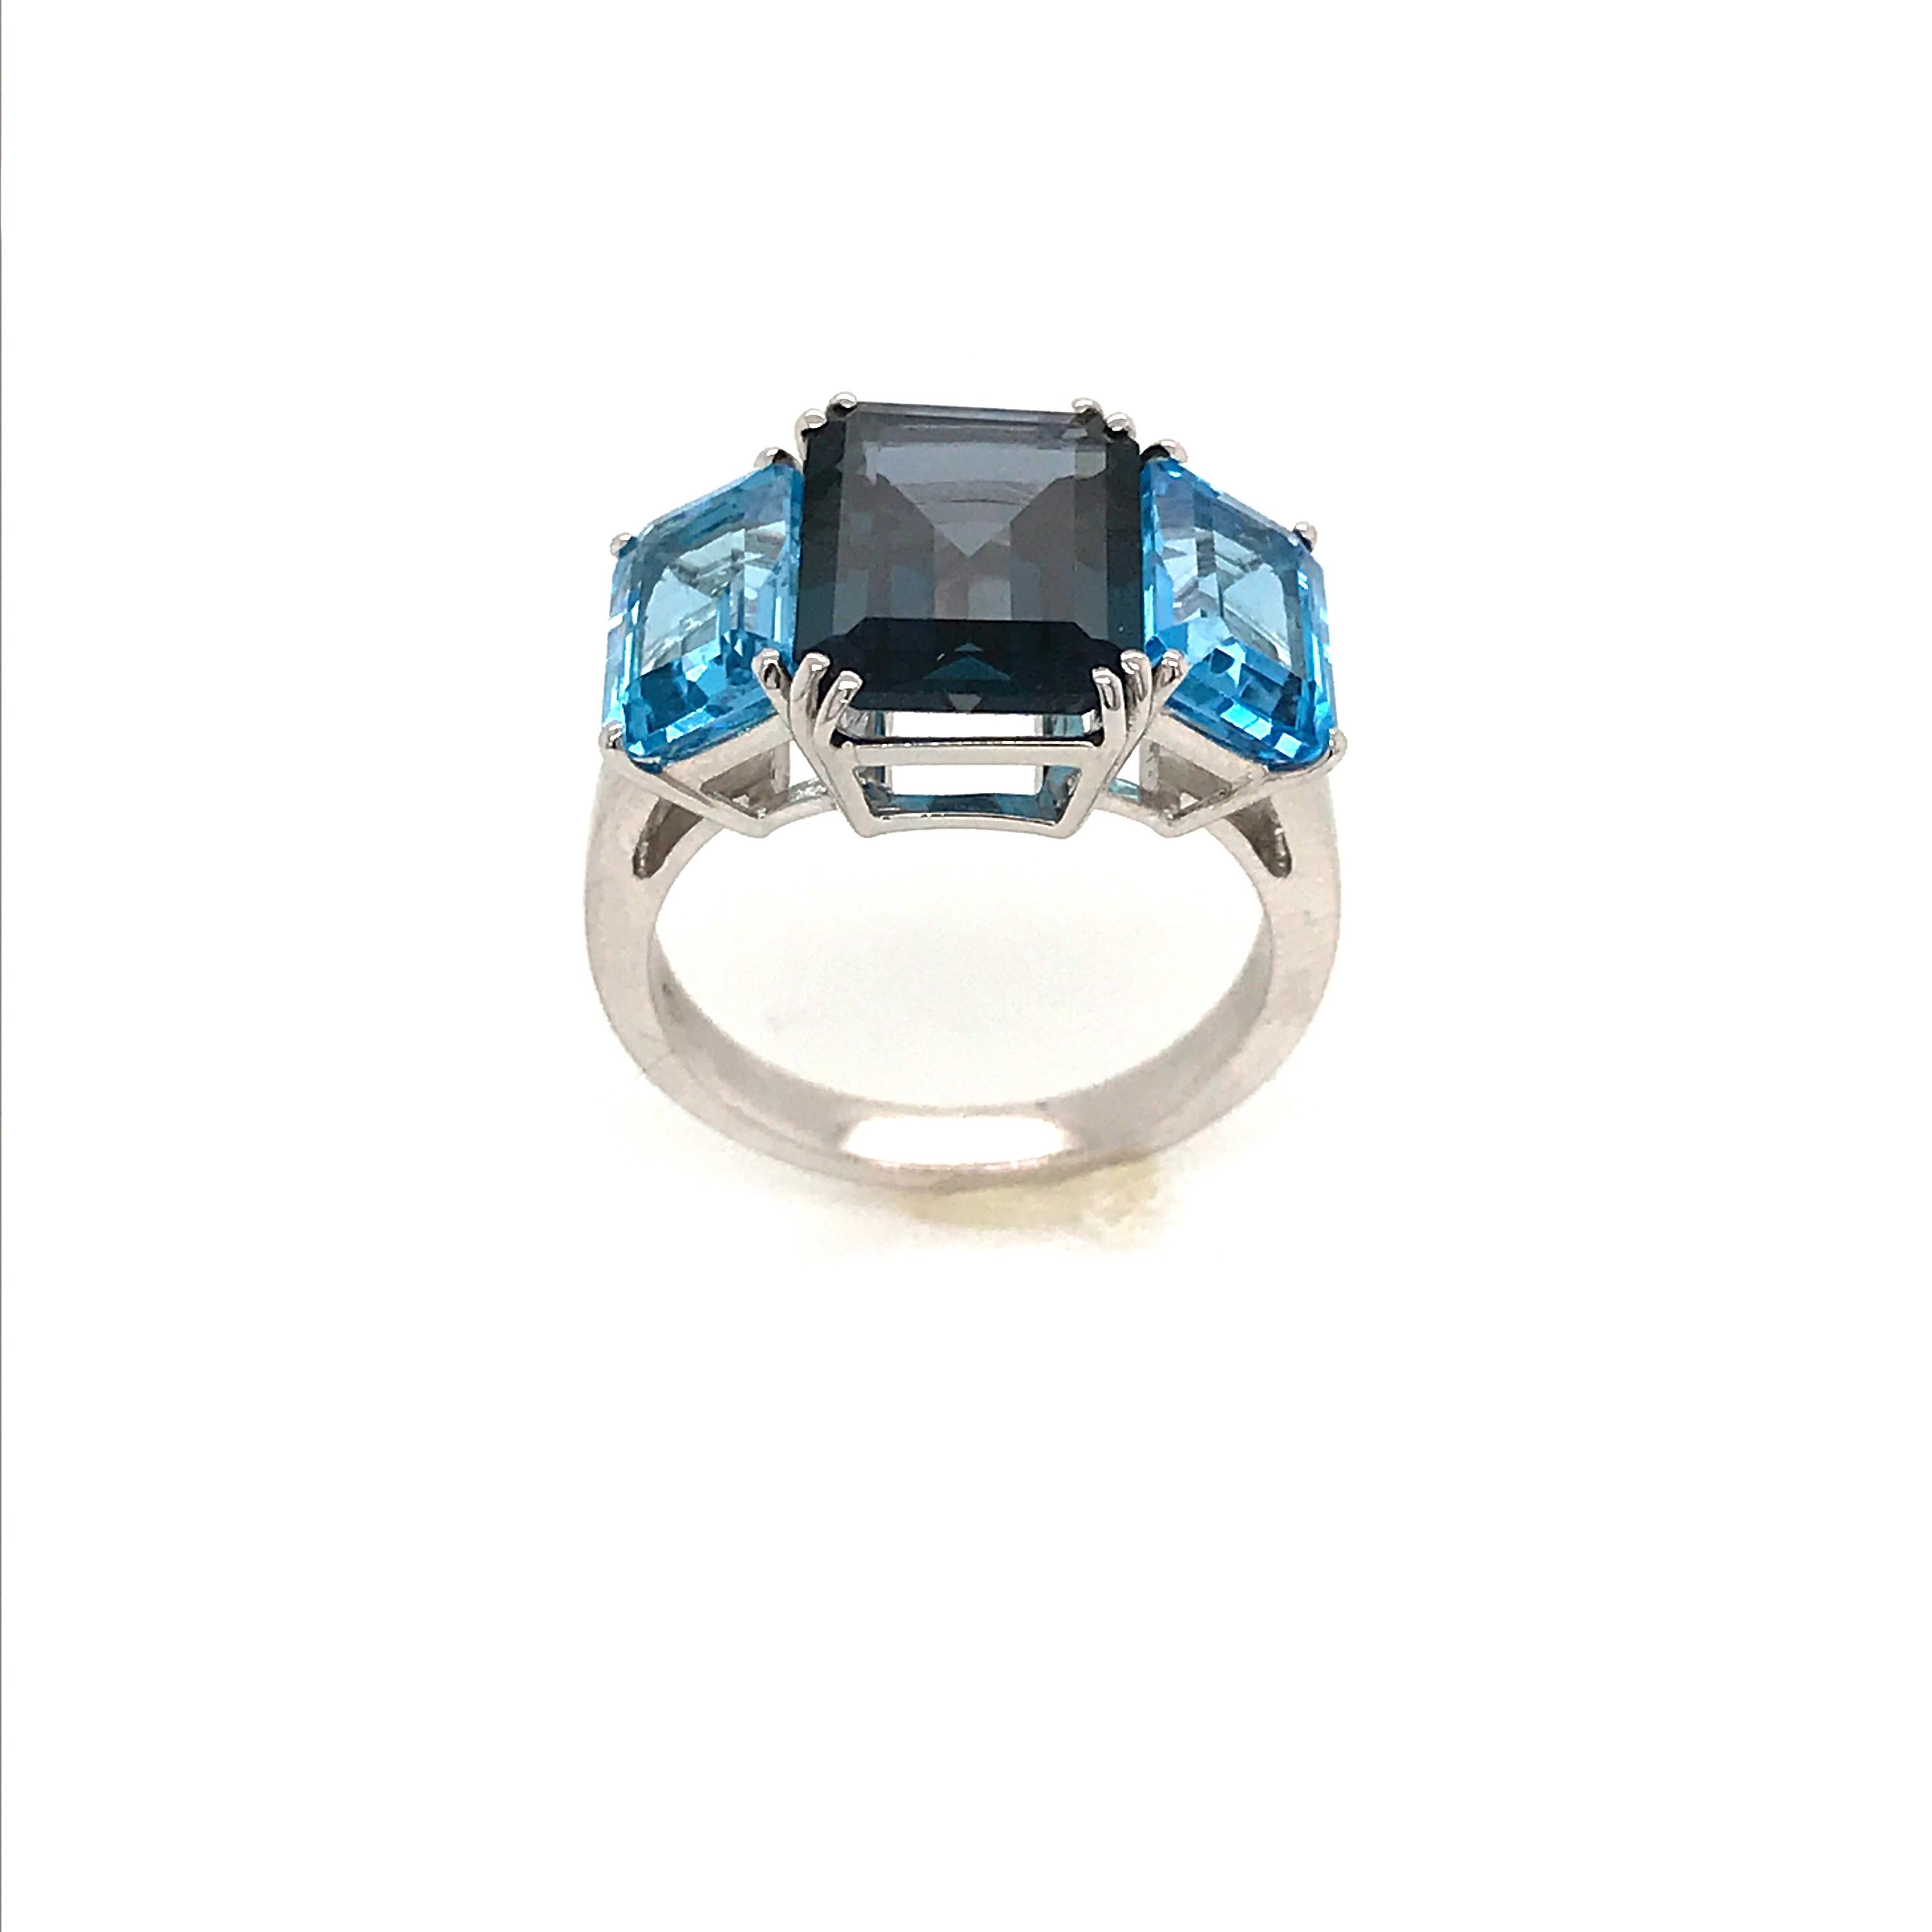 Discover this natural Blue Topaz and London Topaz on White Gold 18 Karat Fashion Ring.
Size of stone Blue Topaz height 1,01 width 0,95 cm
2 London Topaz height 0,8 width 0,6 cm
White Gold 18 Karat 5.1 gr
French Size 53,5
US Size 6.45
